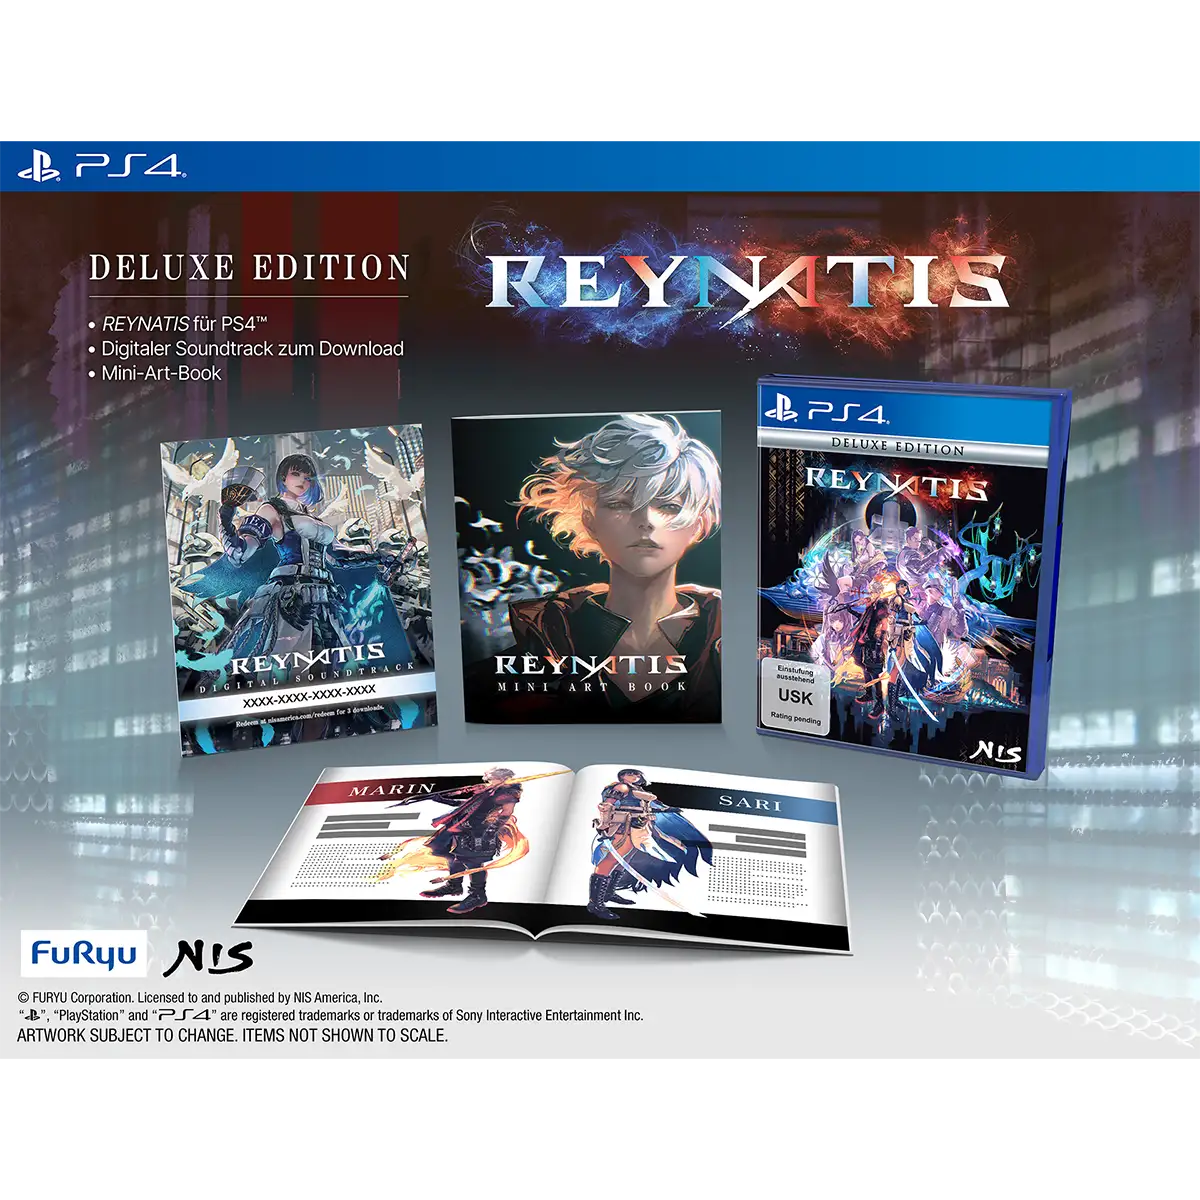 REYNATIS - Deluxe Edition (PS4) Image 2